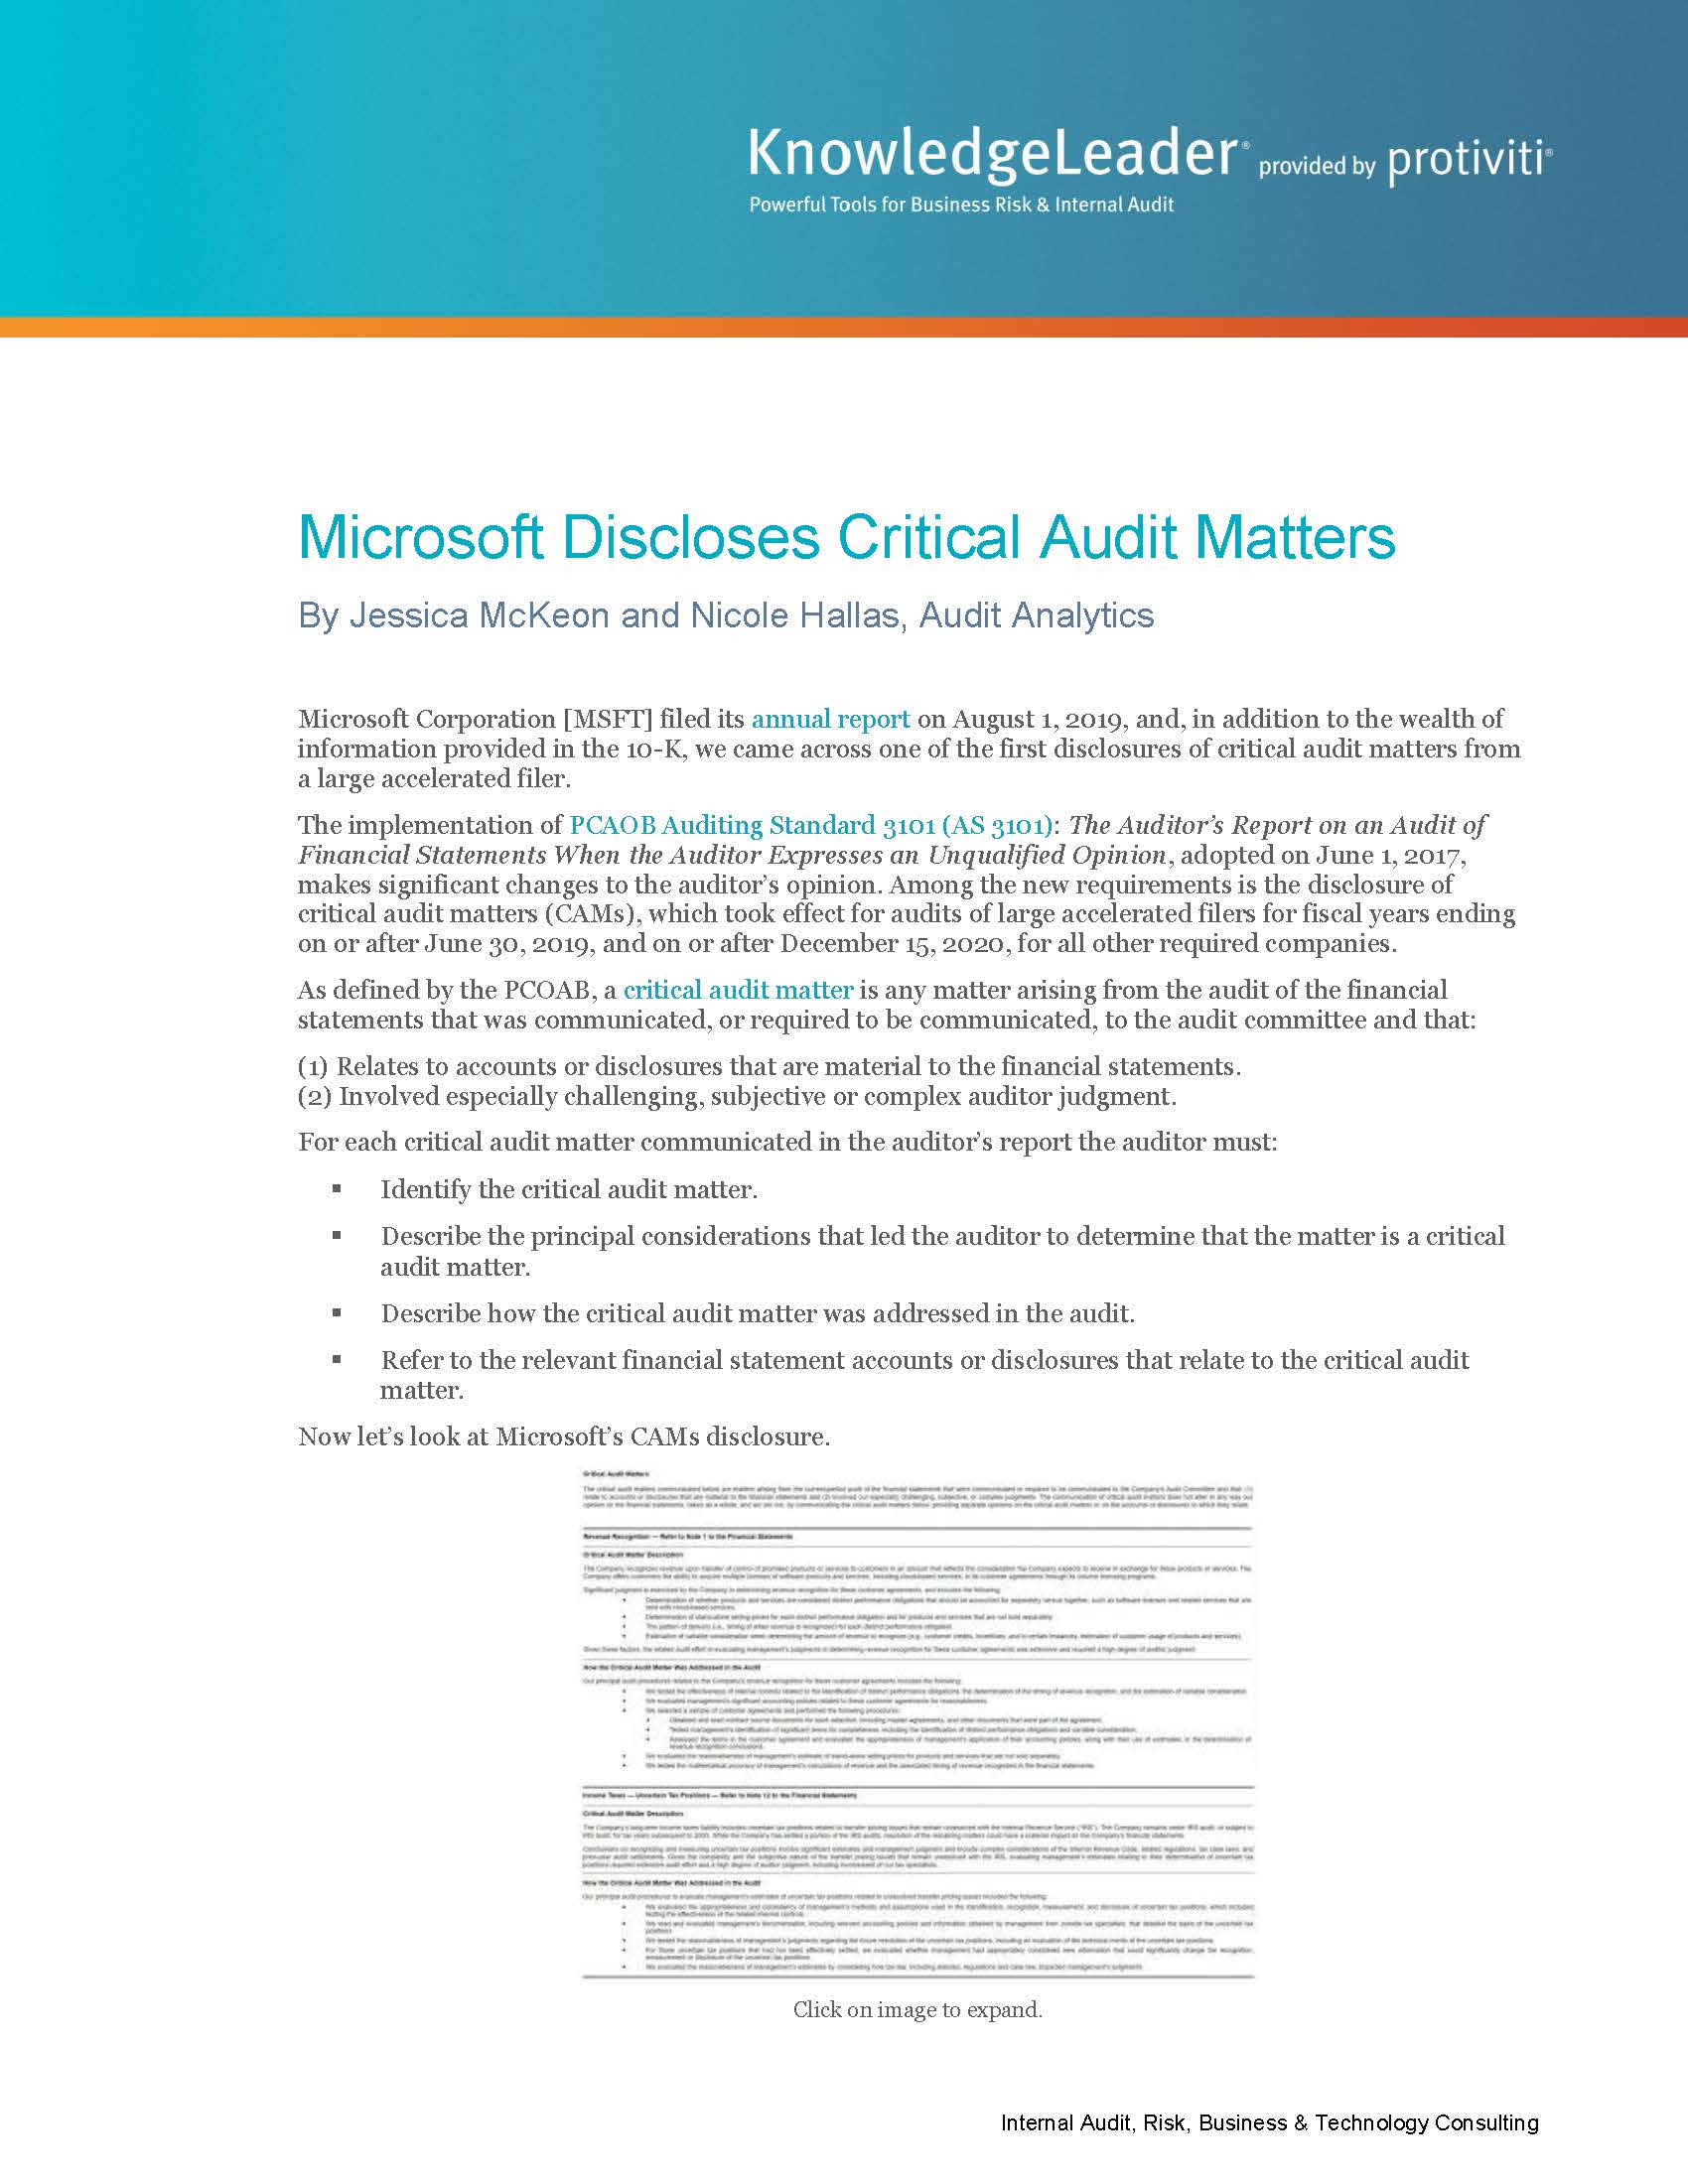 Screenshot of the first page of Microsoft Discloses Critical Audit Matters